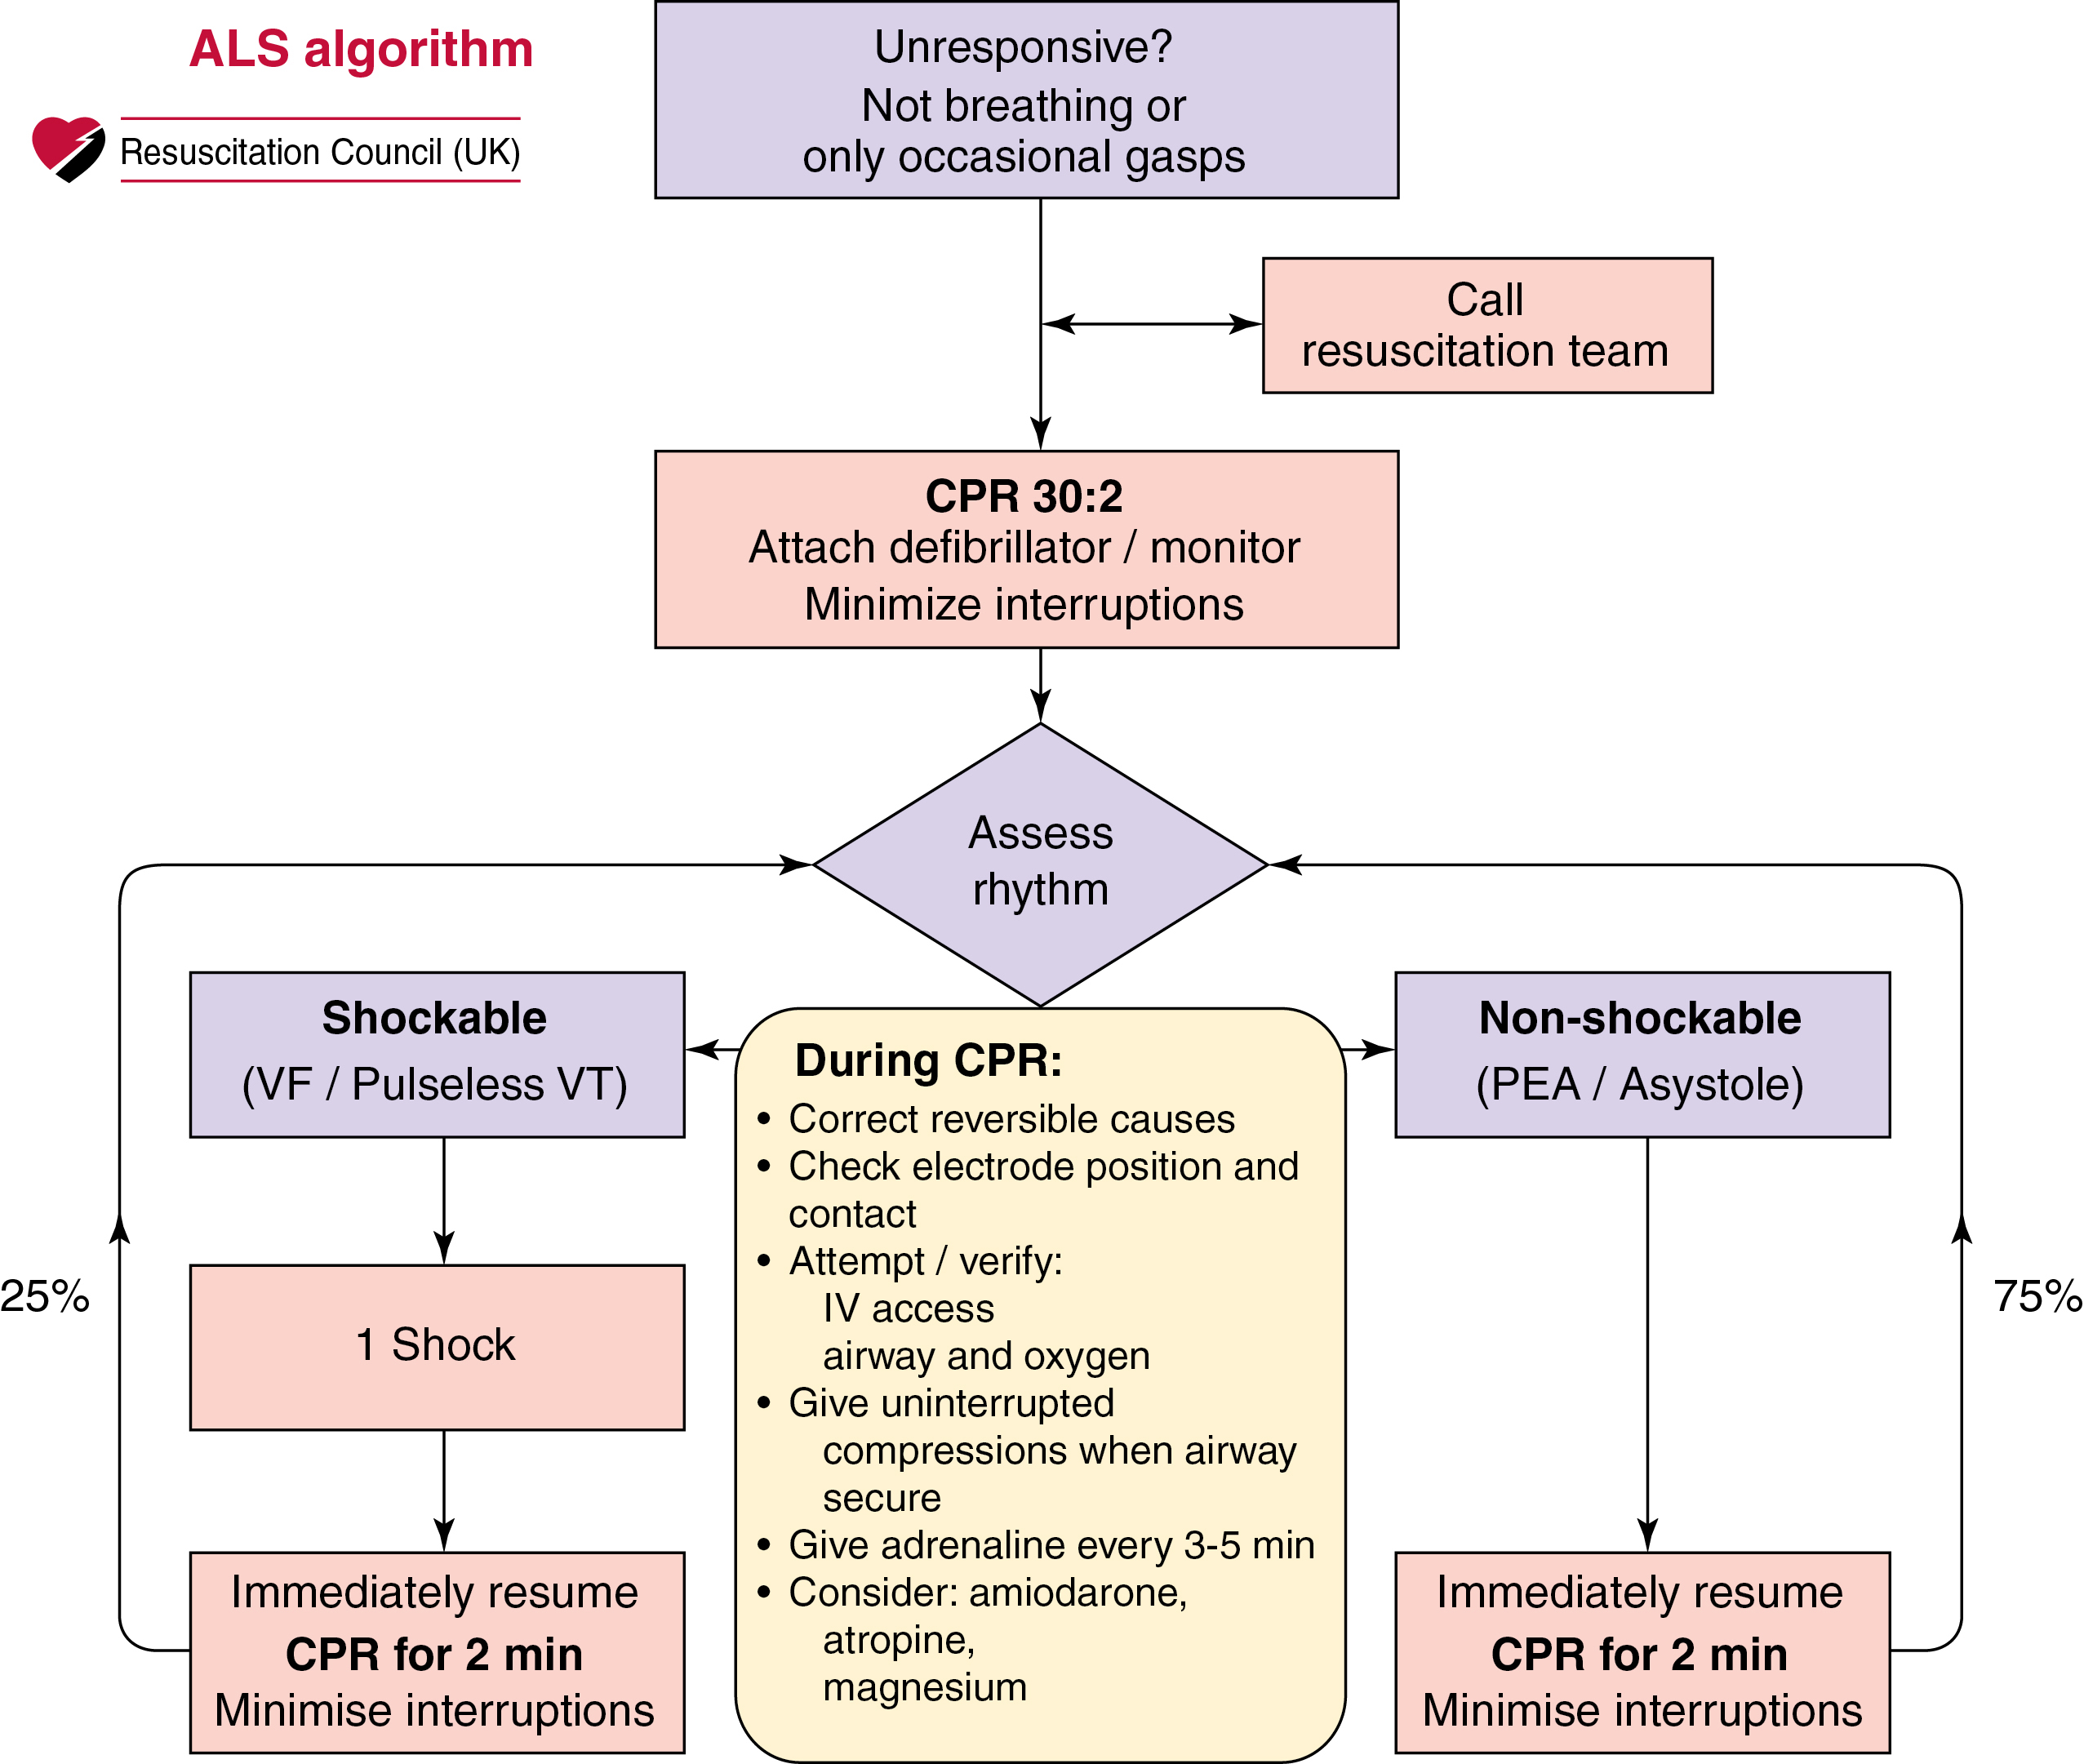 Figure 31-1, Advanced life support (ALS) algorithm. On the right side of the algorithm, in the nonshockable rhythm, the team is urged to seek and correct reversible causes of cardiac arrest. Such causes include the four H’s and four T’s: hypovolemia, hypocapnia/hypercapnia, hypoxemia, hypothermia, tamponade, thrombosis (coronary/pulmonary), toxins, and tension pneumothorax.